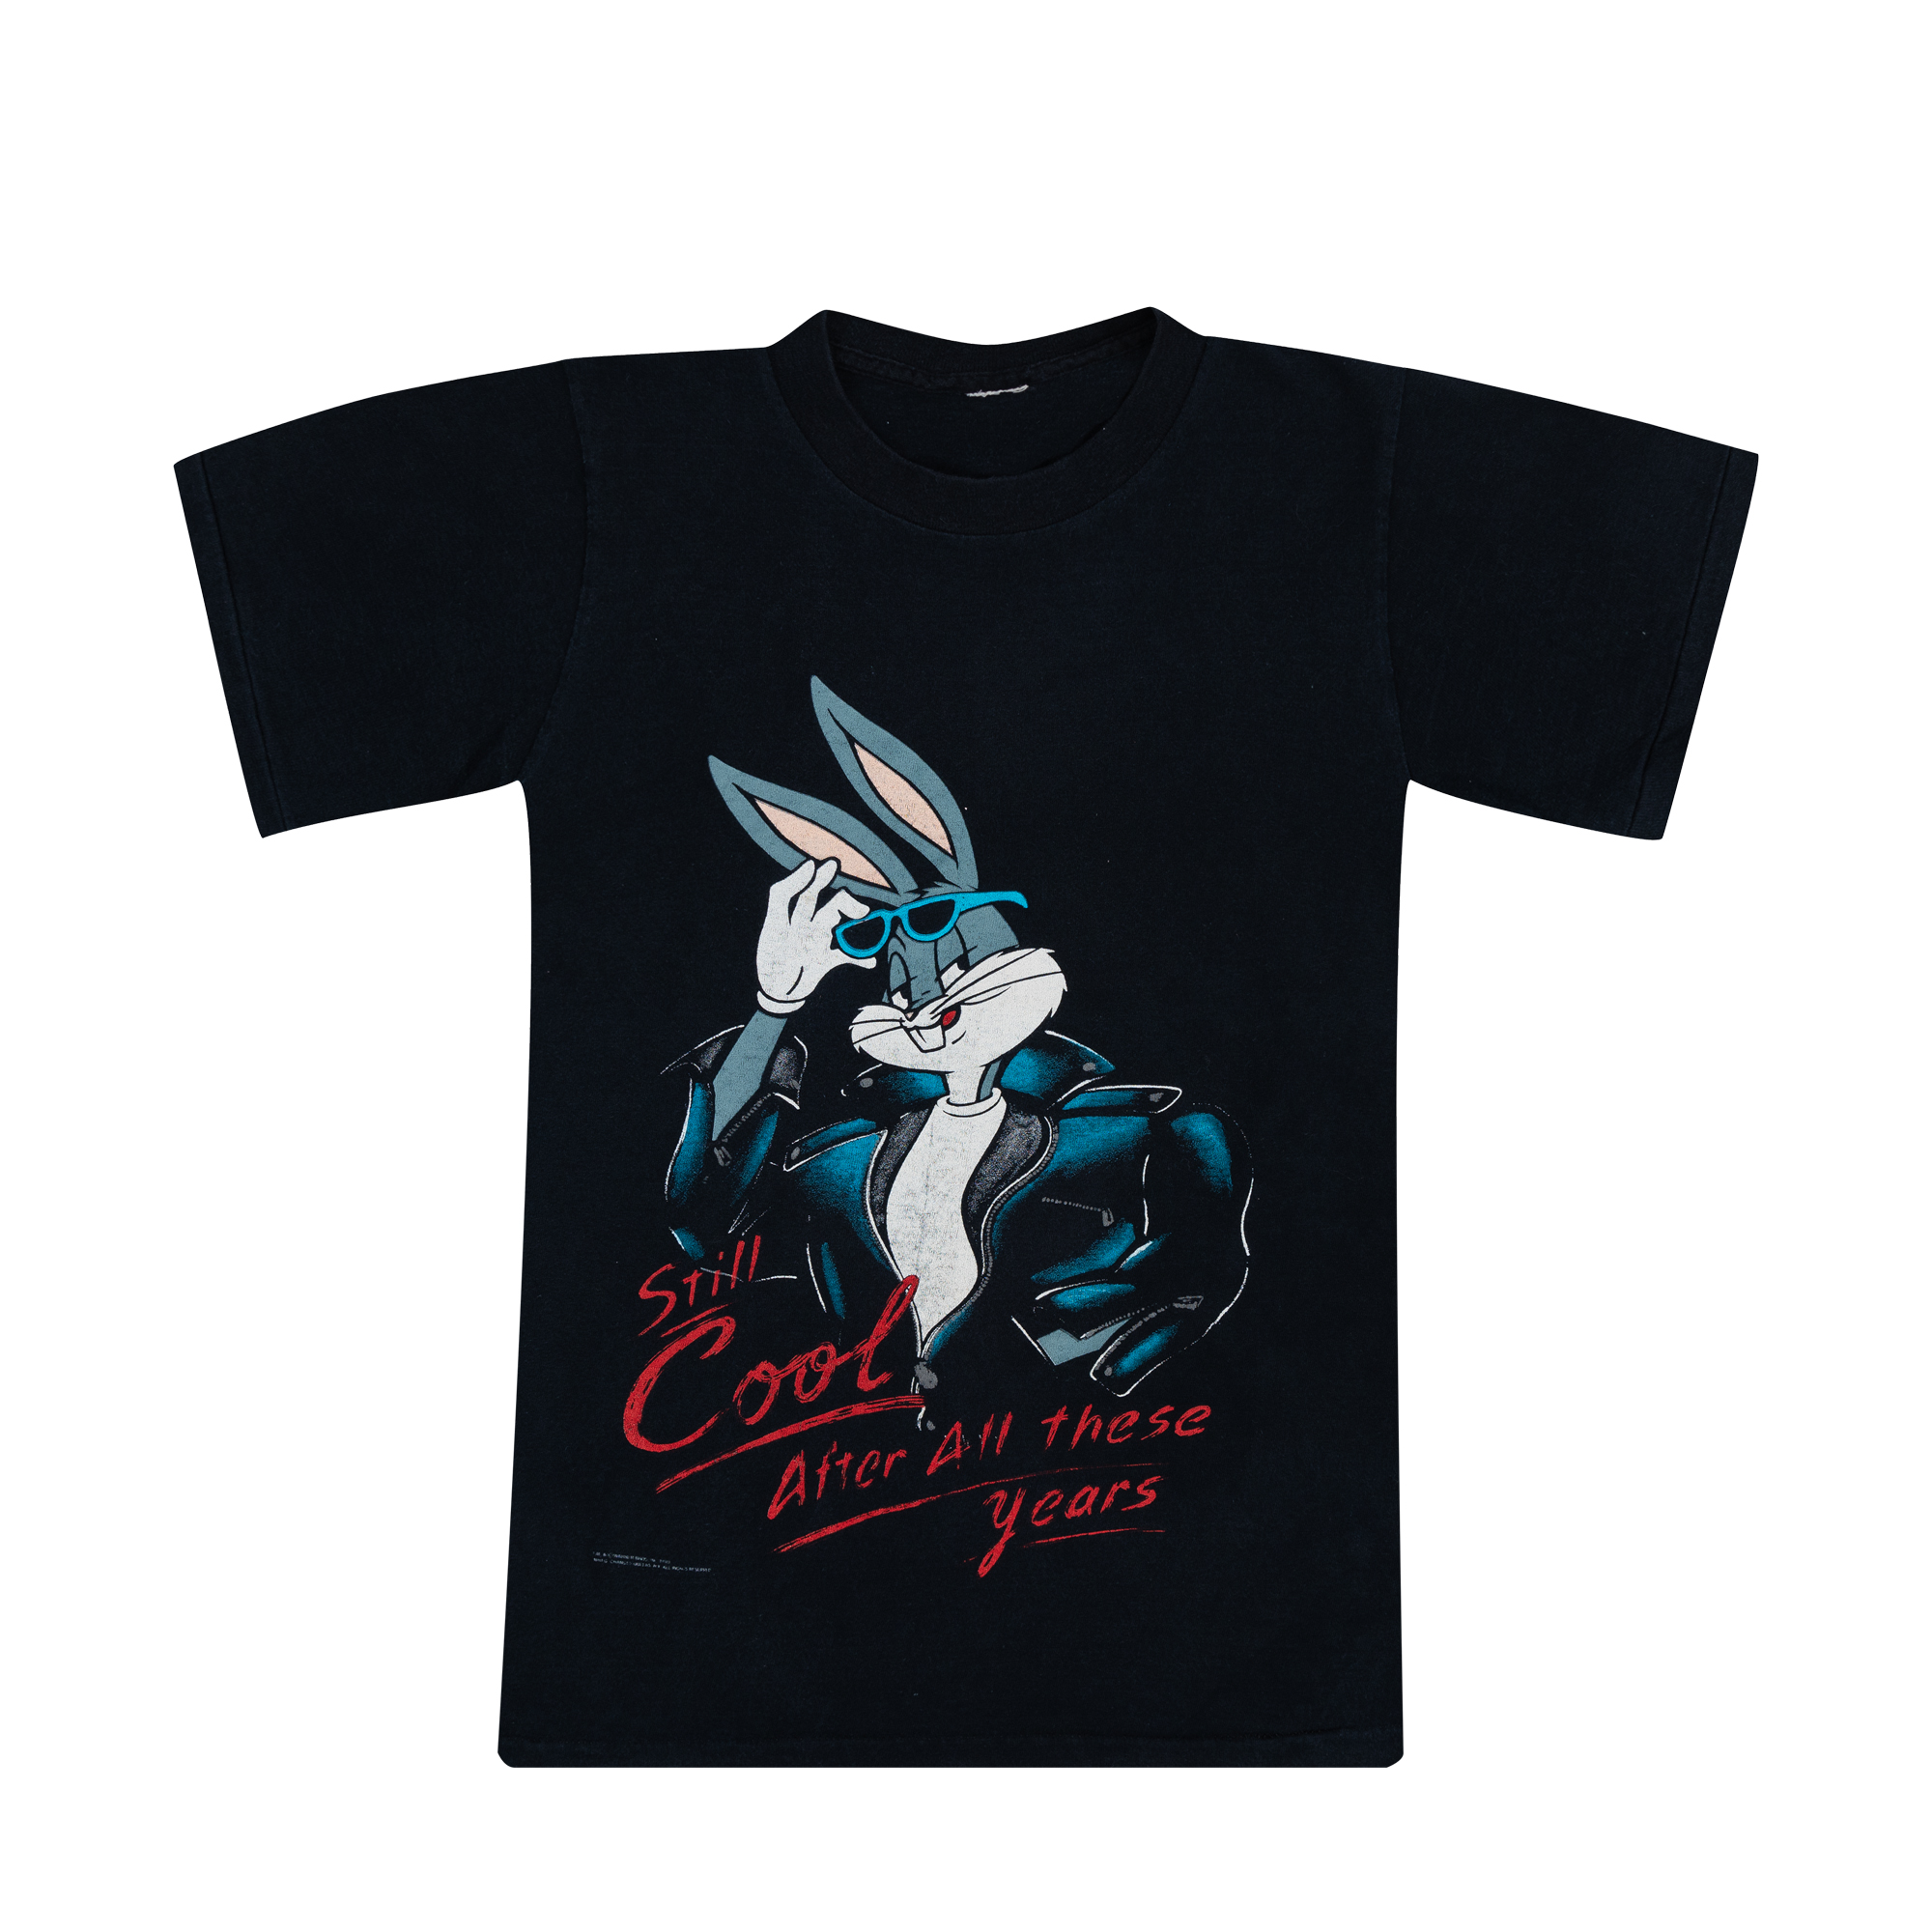 Bugs Bunny "Still Cool After All These Years" Tee Navy-PLUS